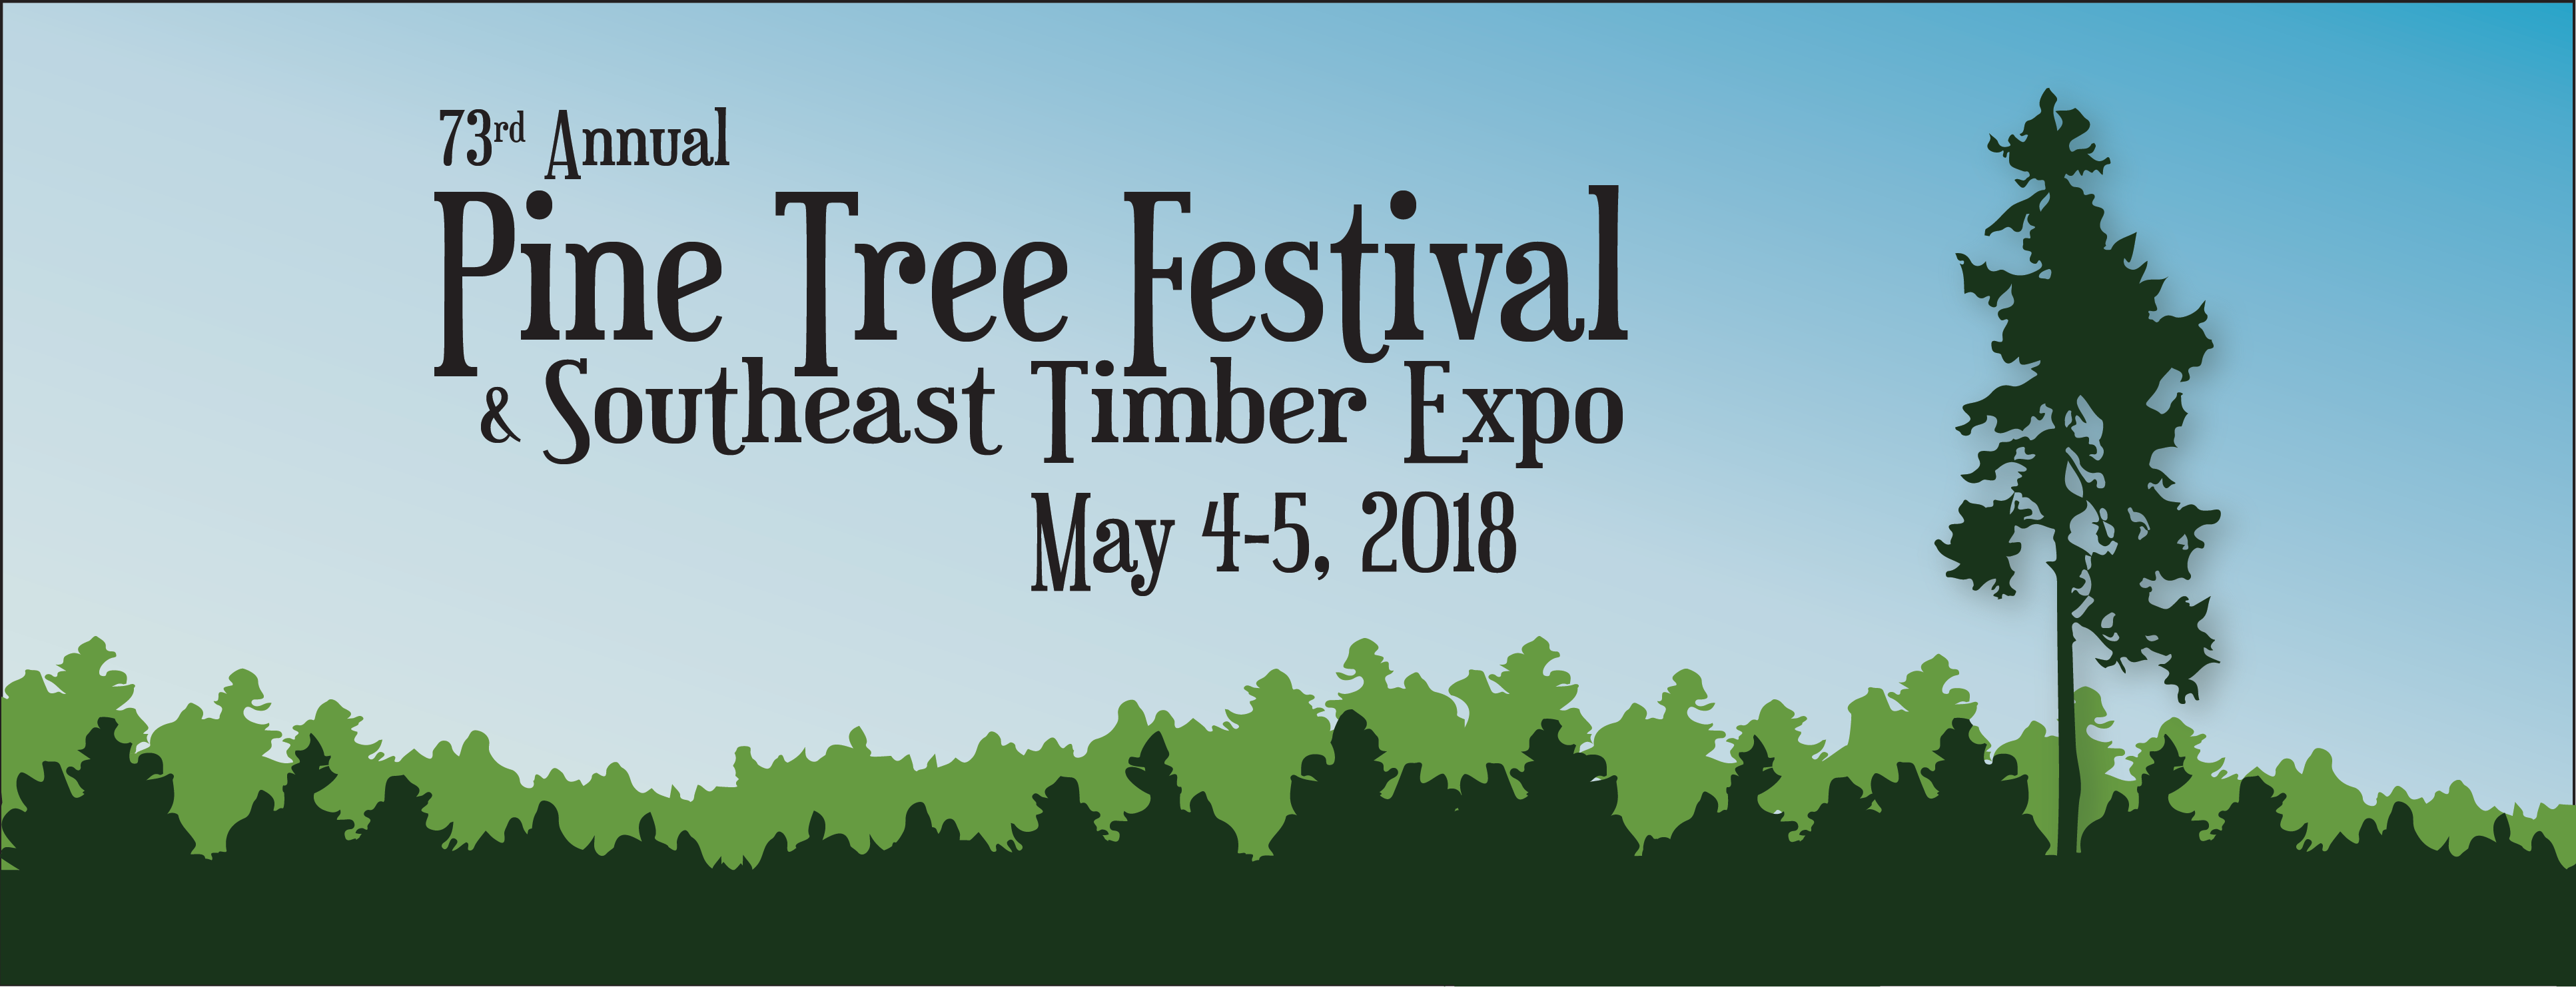 2018 Pine Tree Festival and Southeast Timber Expo